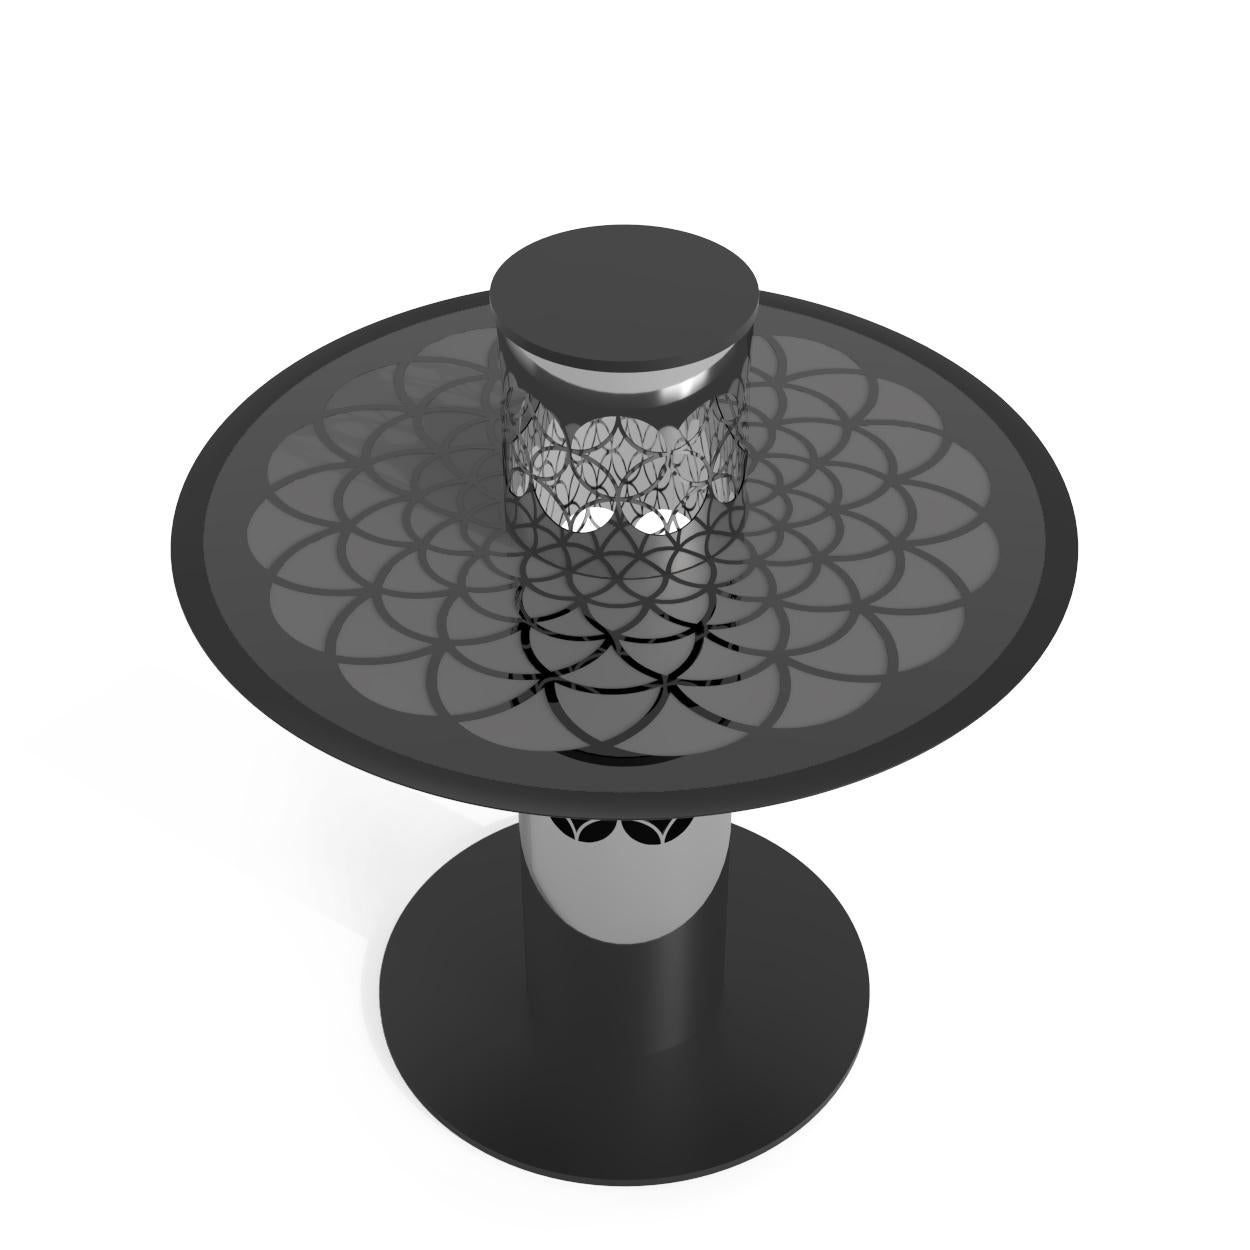 Modern Arabic-Inspired Center Tea Table Polished Stainless Steel and Black Glass For Sale 2